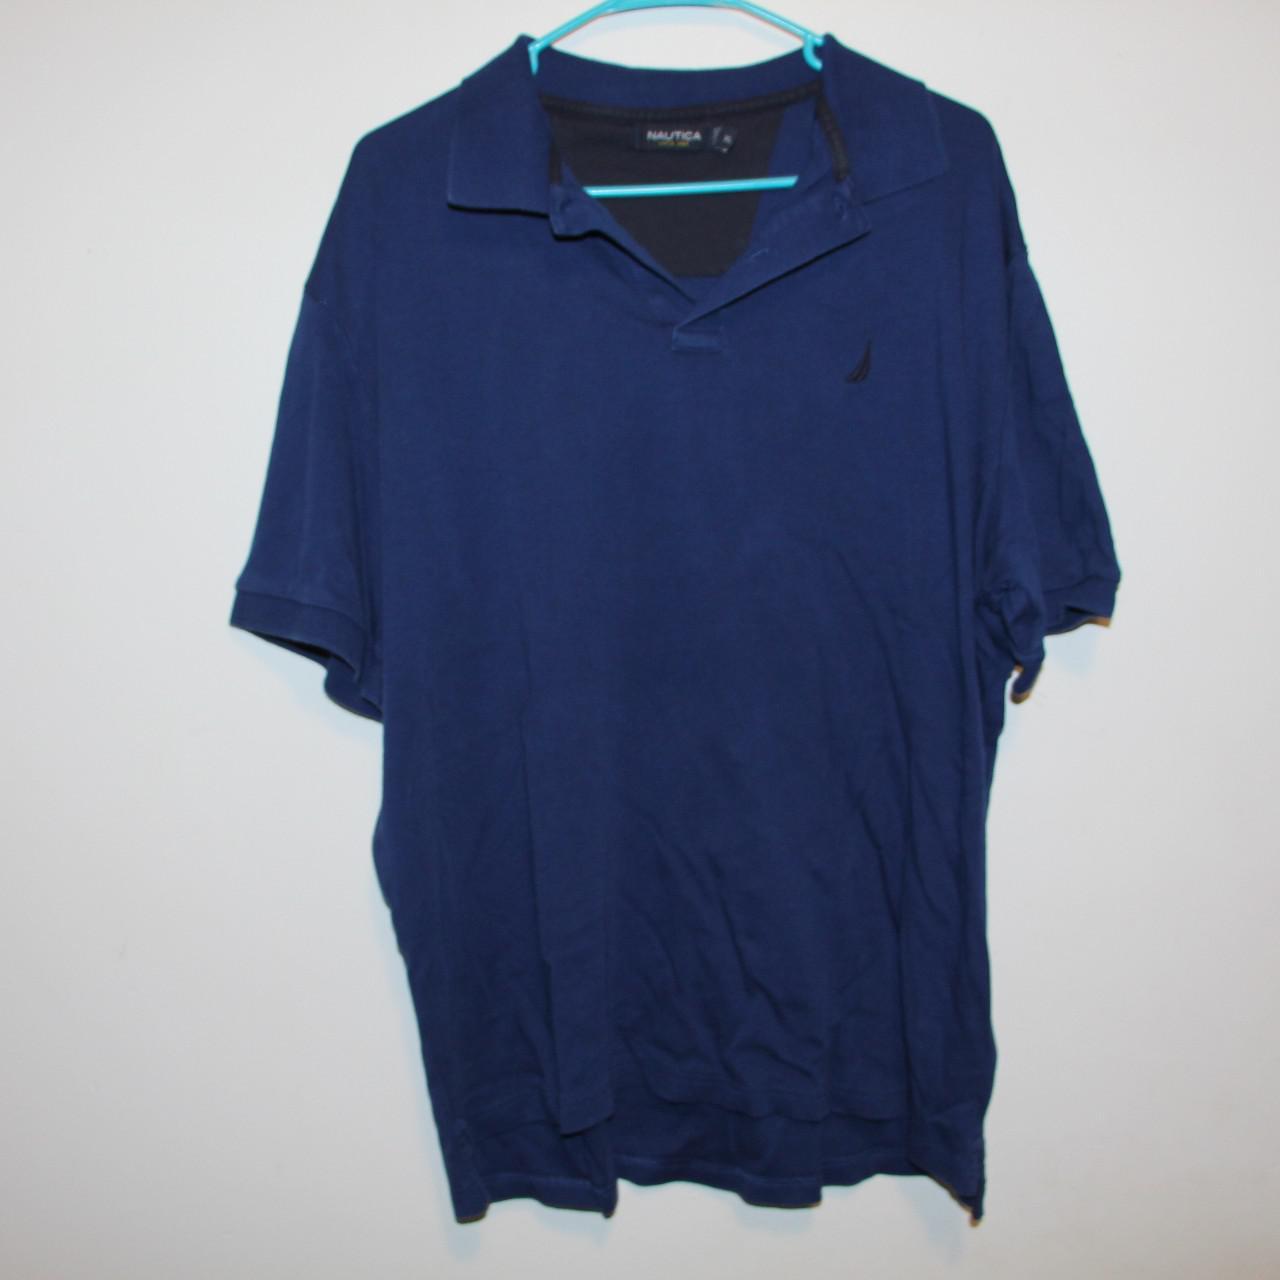 Product Image 2 - Dark Blue Polo Shirt
Great Condition